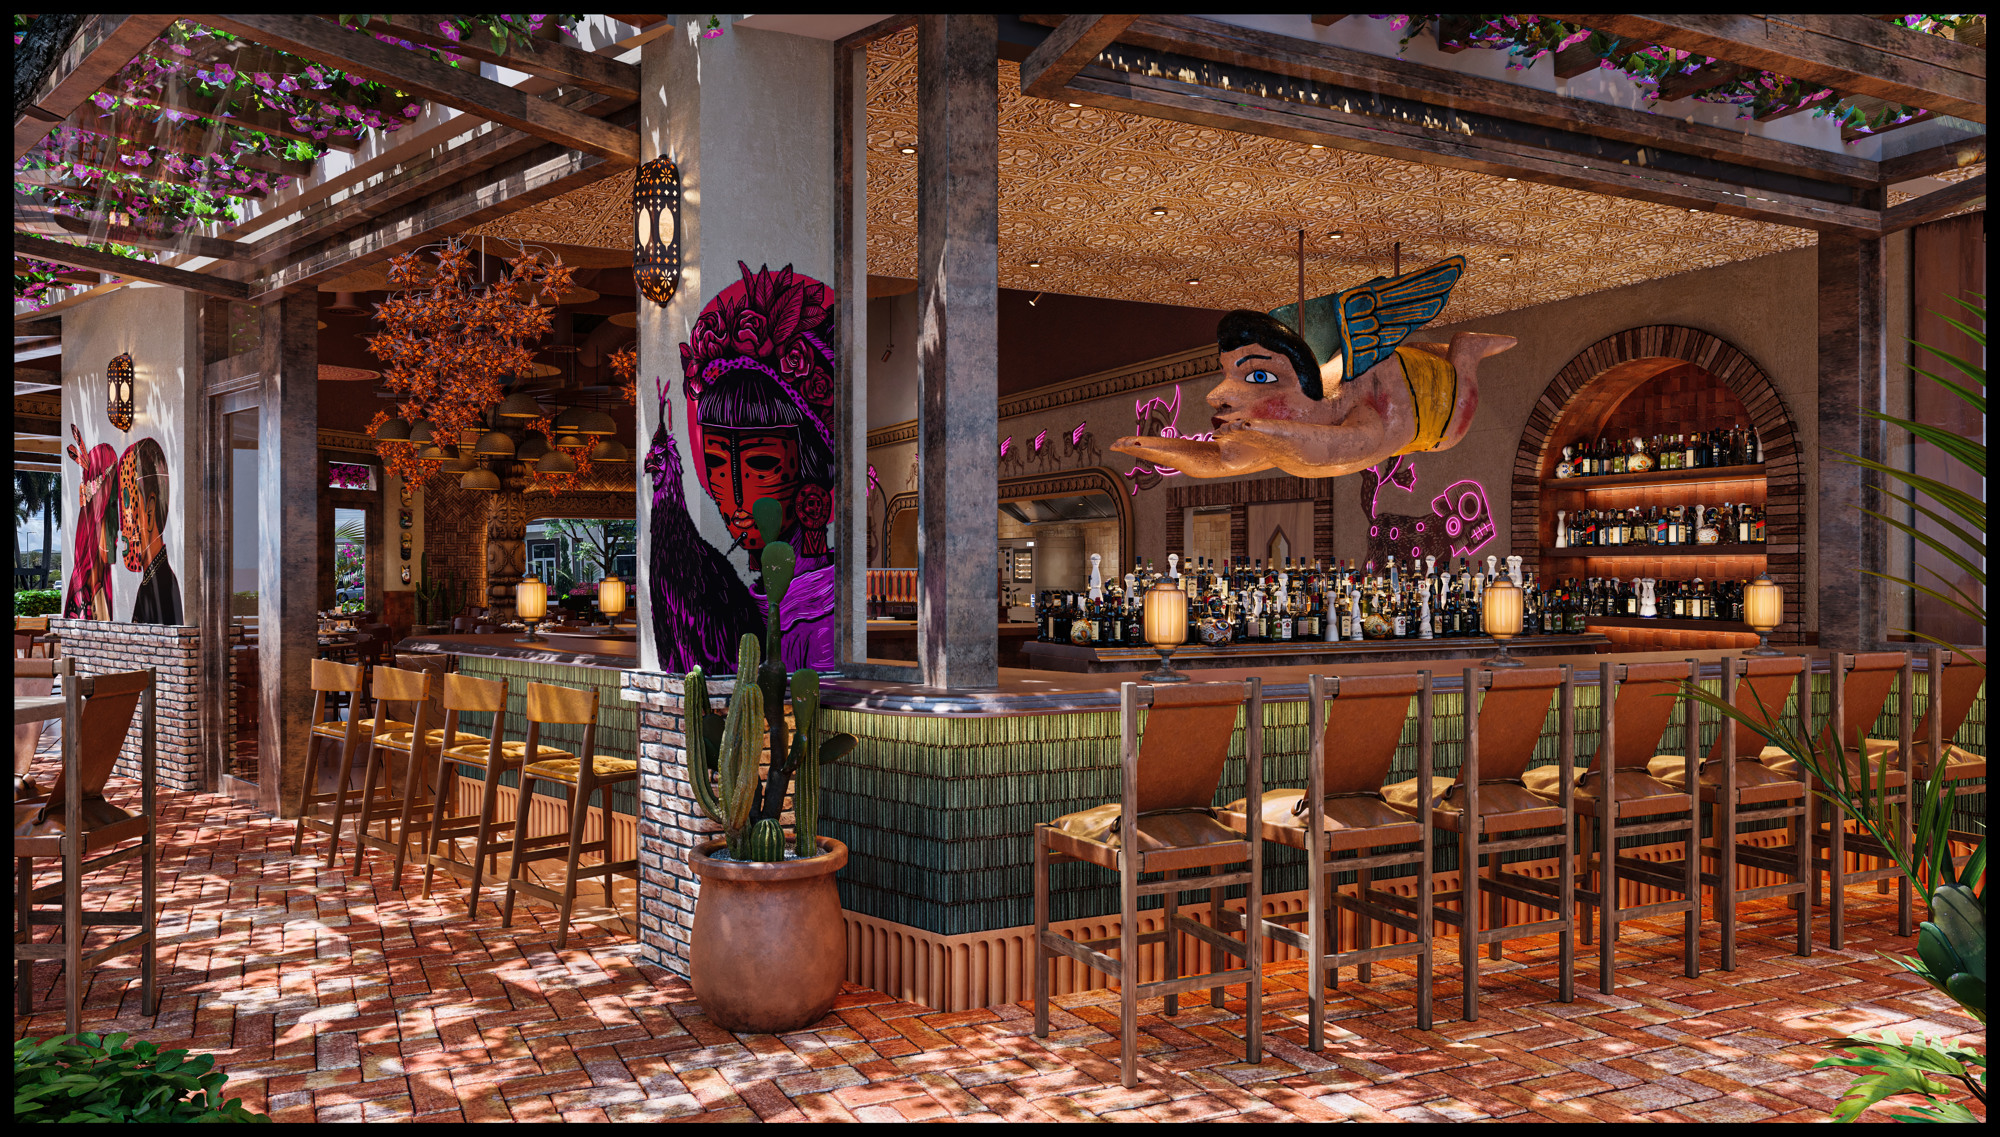 The bar at Rocco's Taco's and Tequila Bar will offer a variety of drink choices, including more than 300 types of tequila. (Courtesy photo)